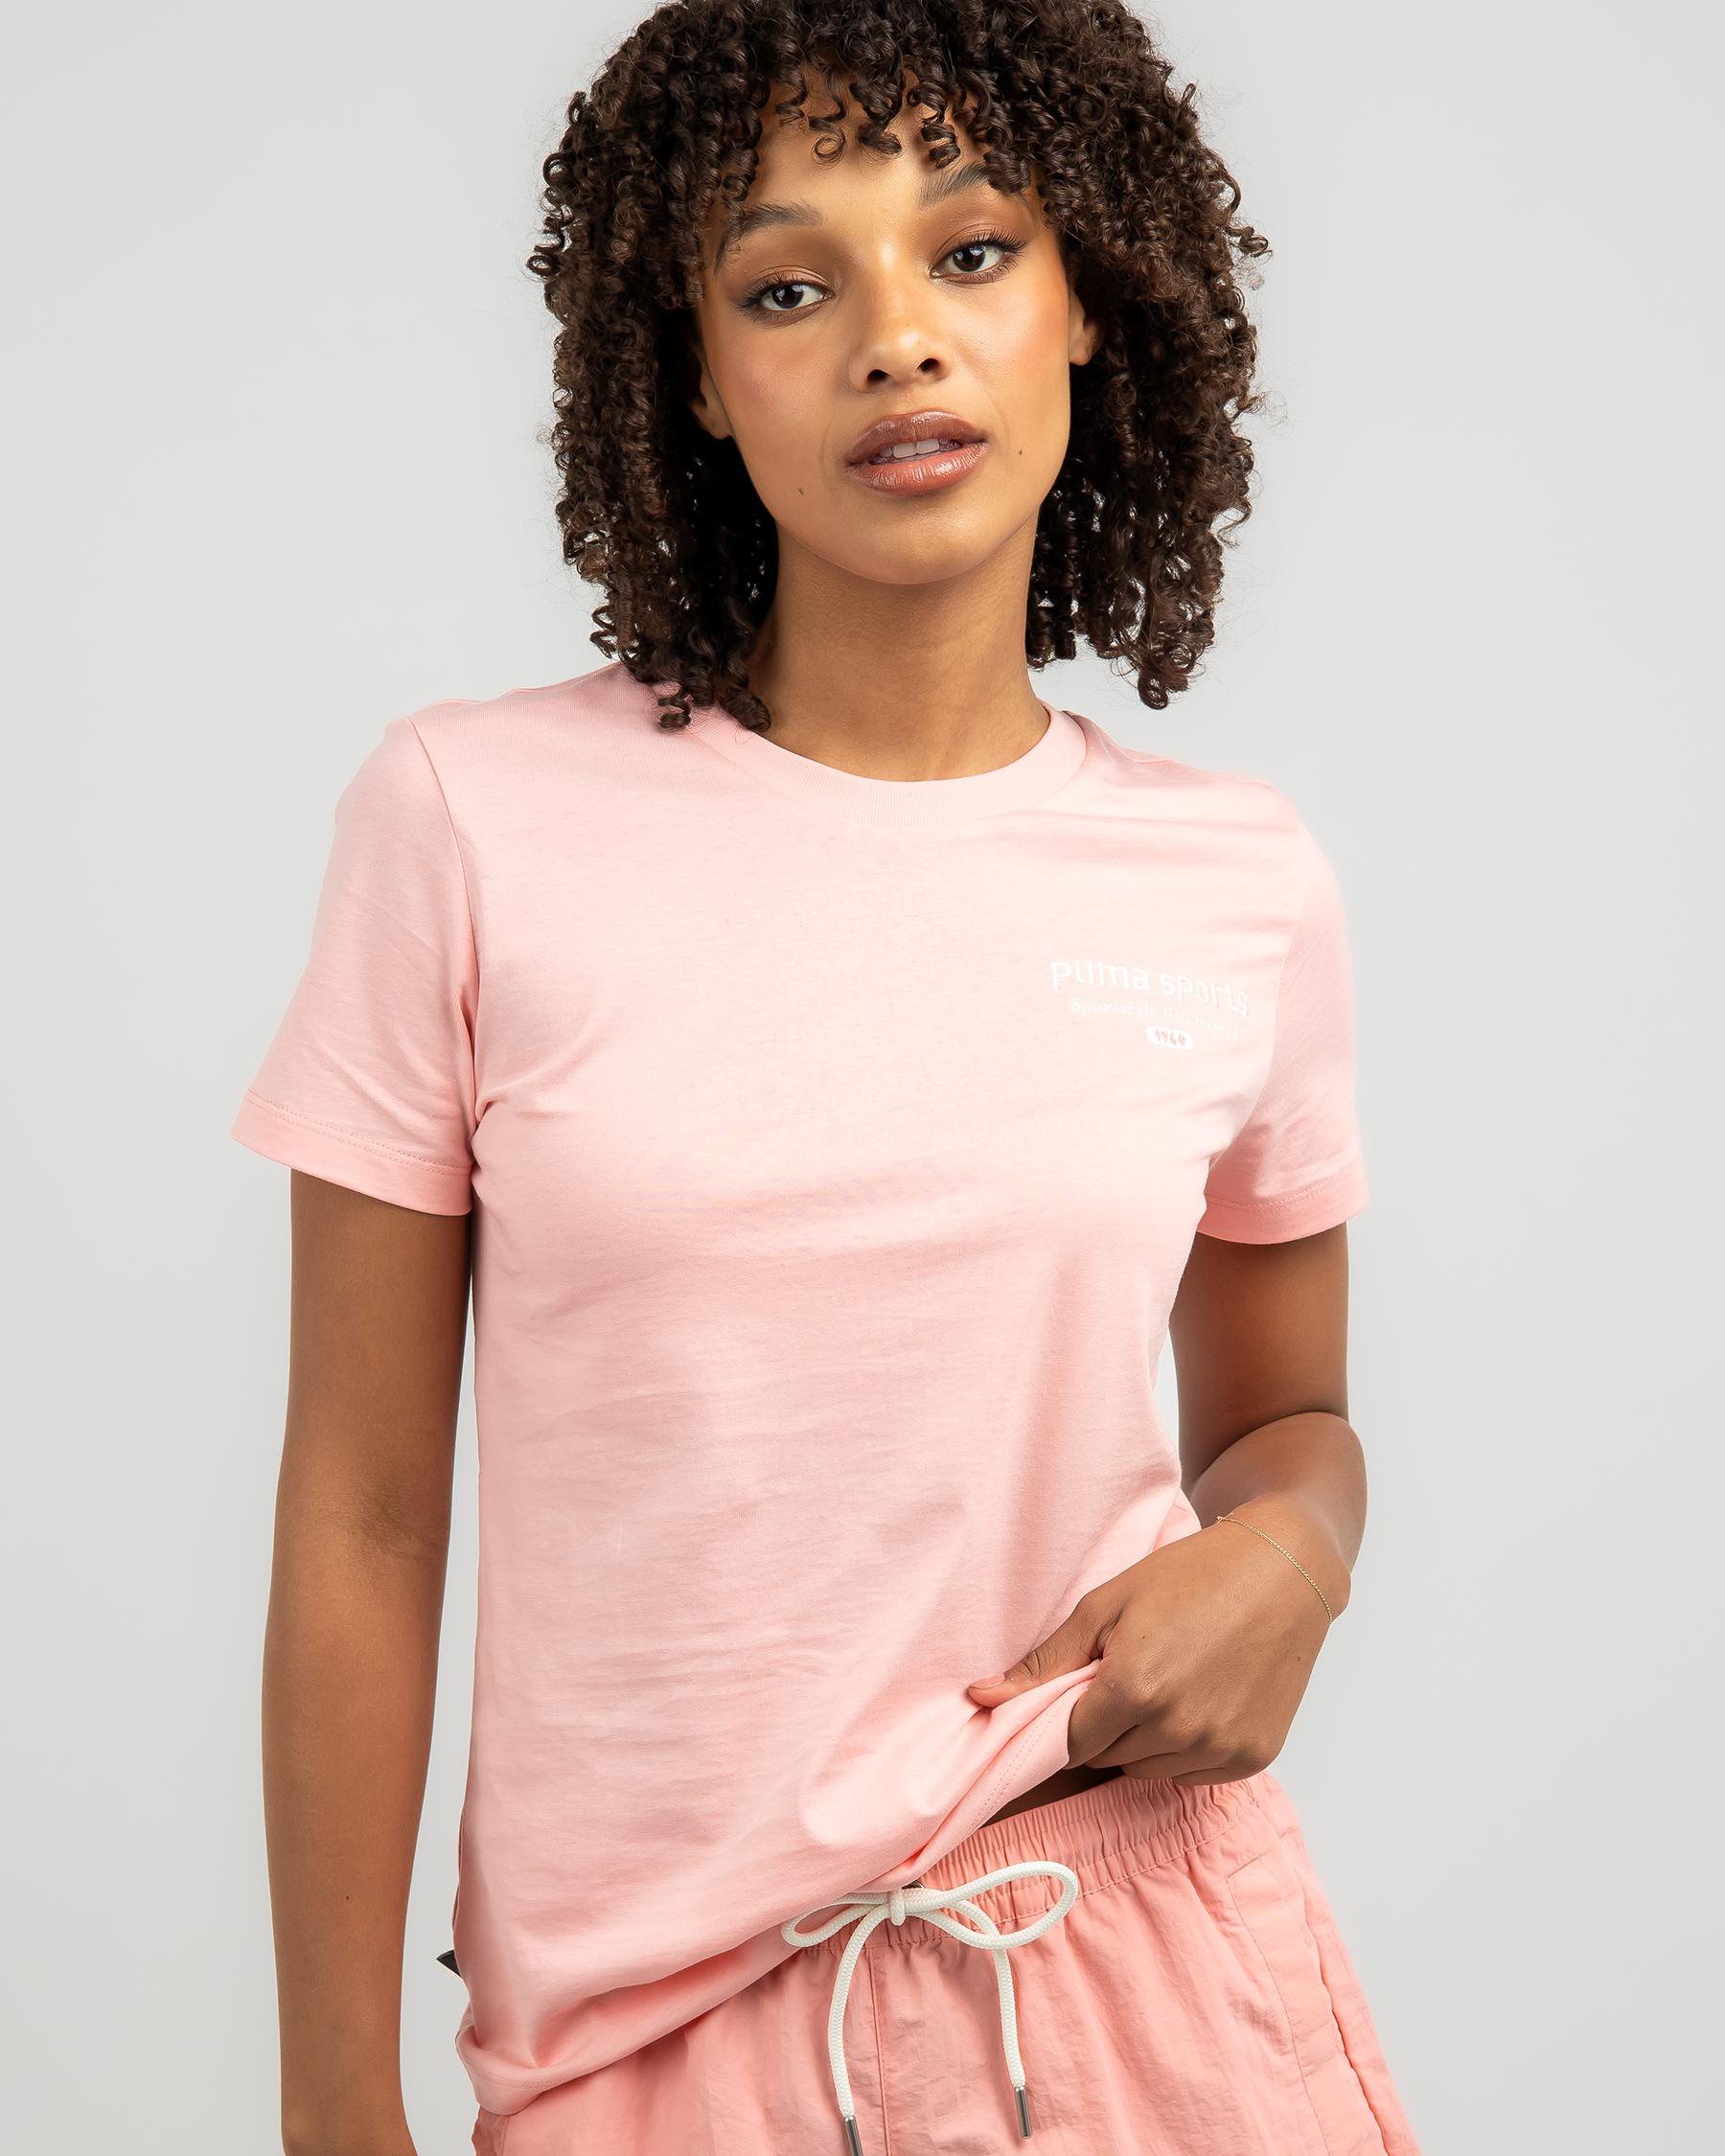 Puma Team Graphic T-Shirt Peach & Easy United FREE* - Smoothie Beach In City - States Returns Shipping